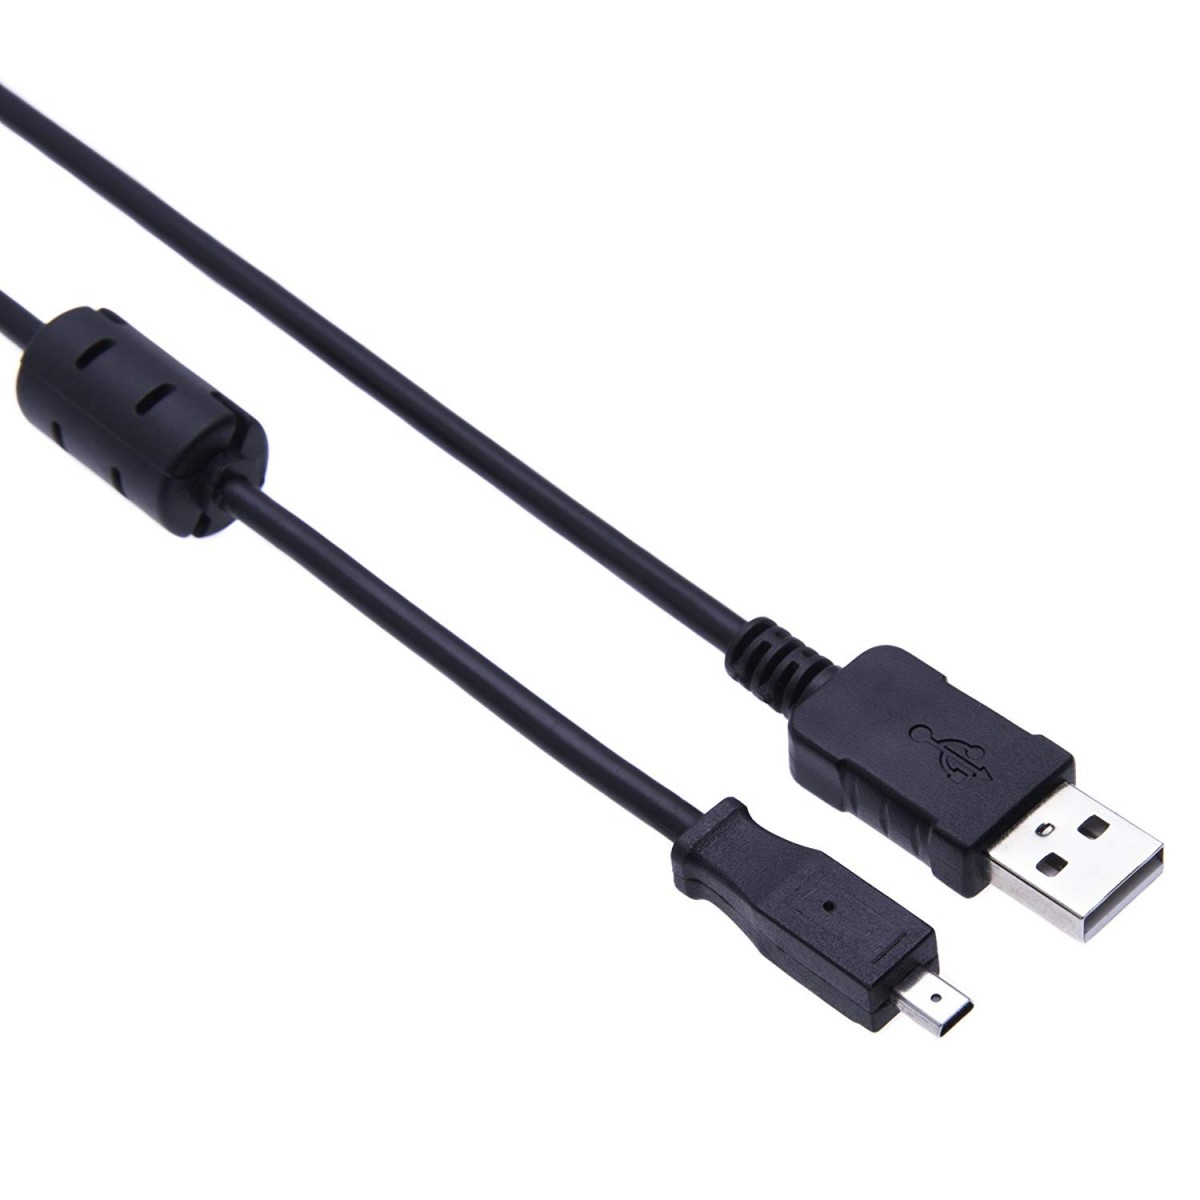 USB cable and HDMI cable for Kodak PIXPRO SPZ1 